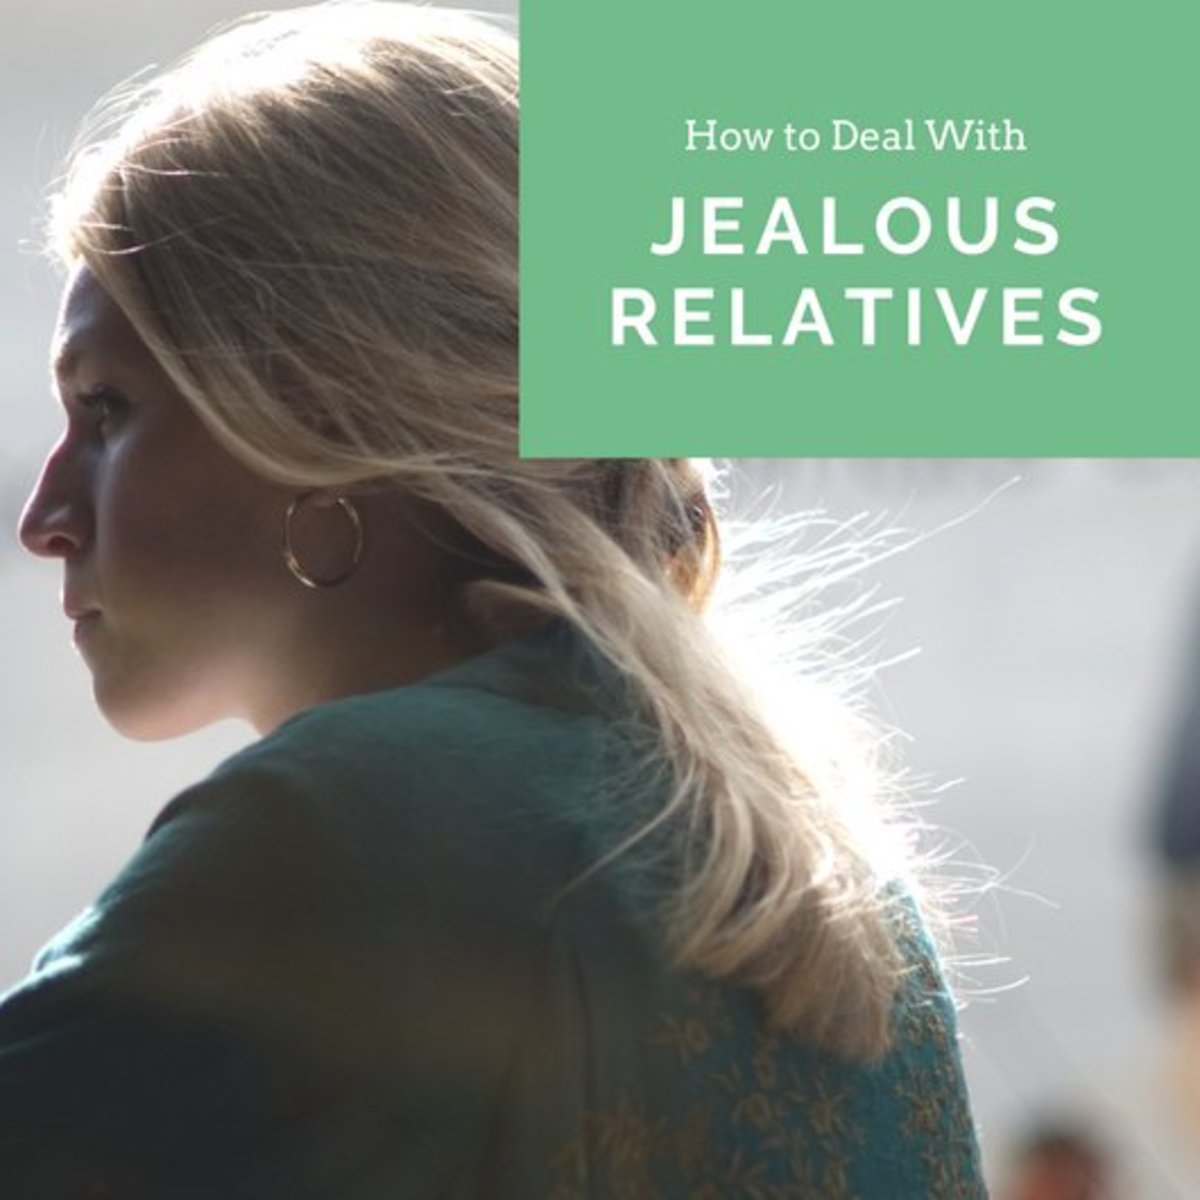 Signs Of Jealous Family Members And How To Deal With Them Wehavekids